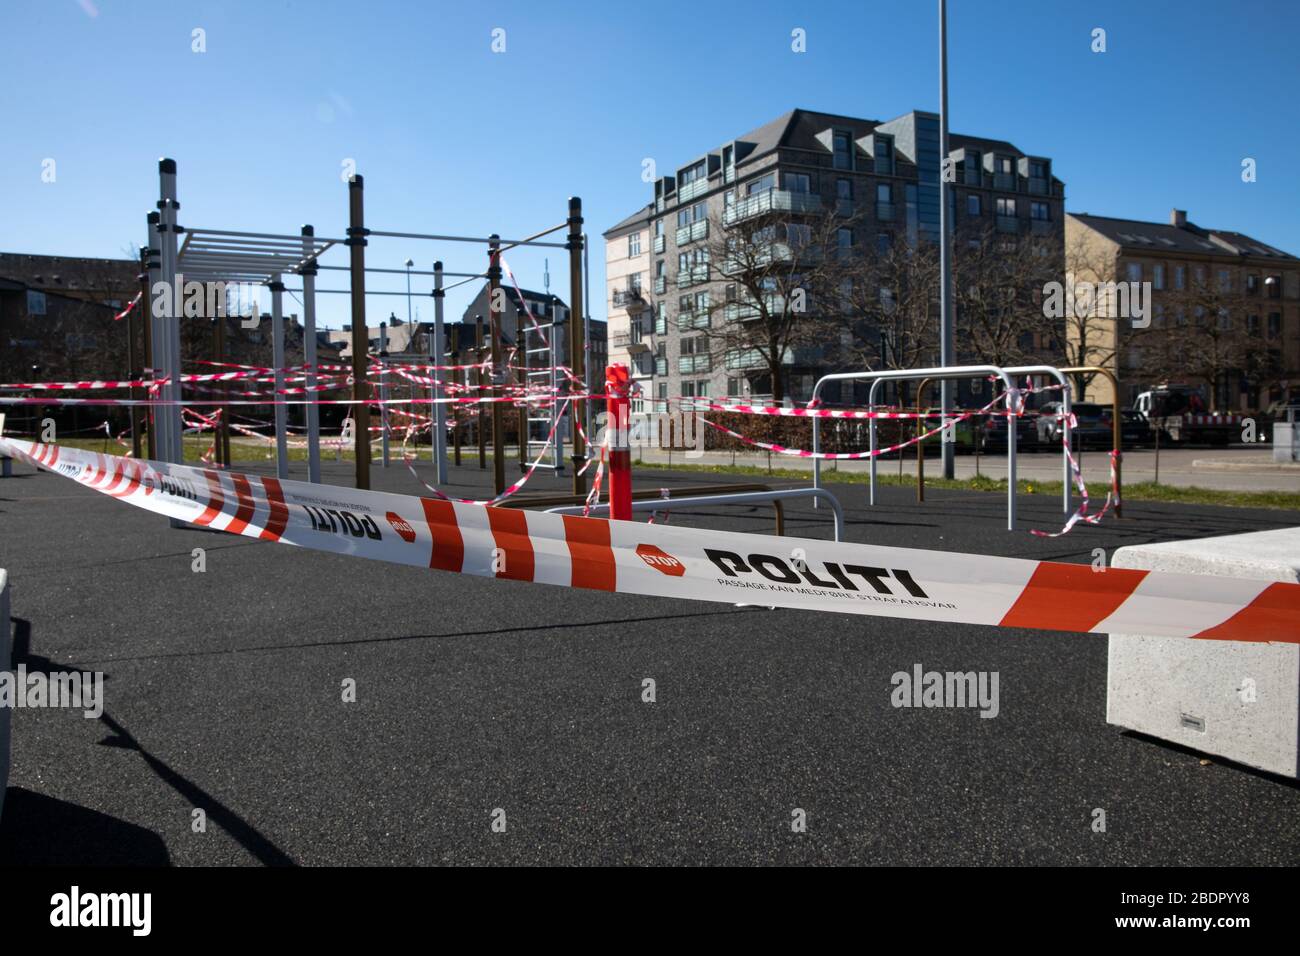 Public playground and training facilities have been sealed off by police during the corona lockdown in Copenhagen. Stock Photo